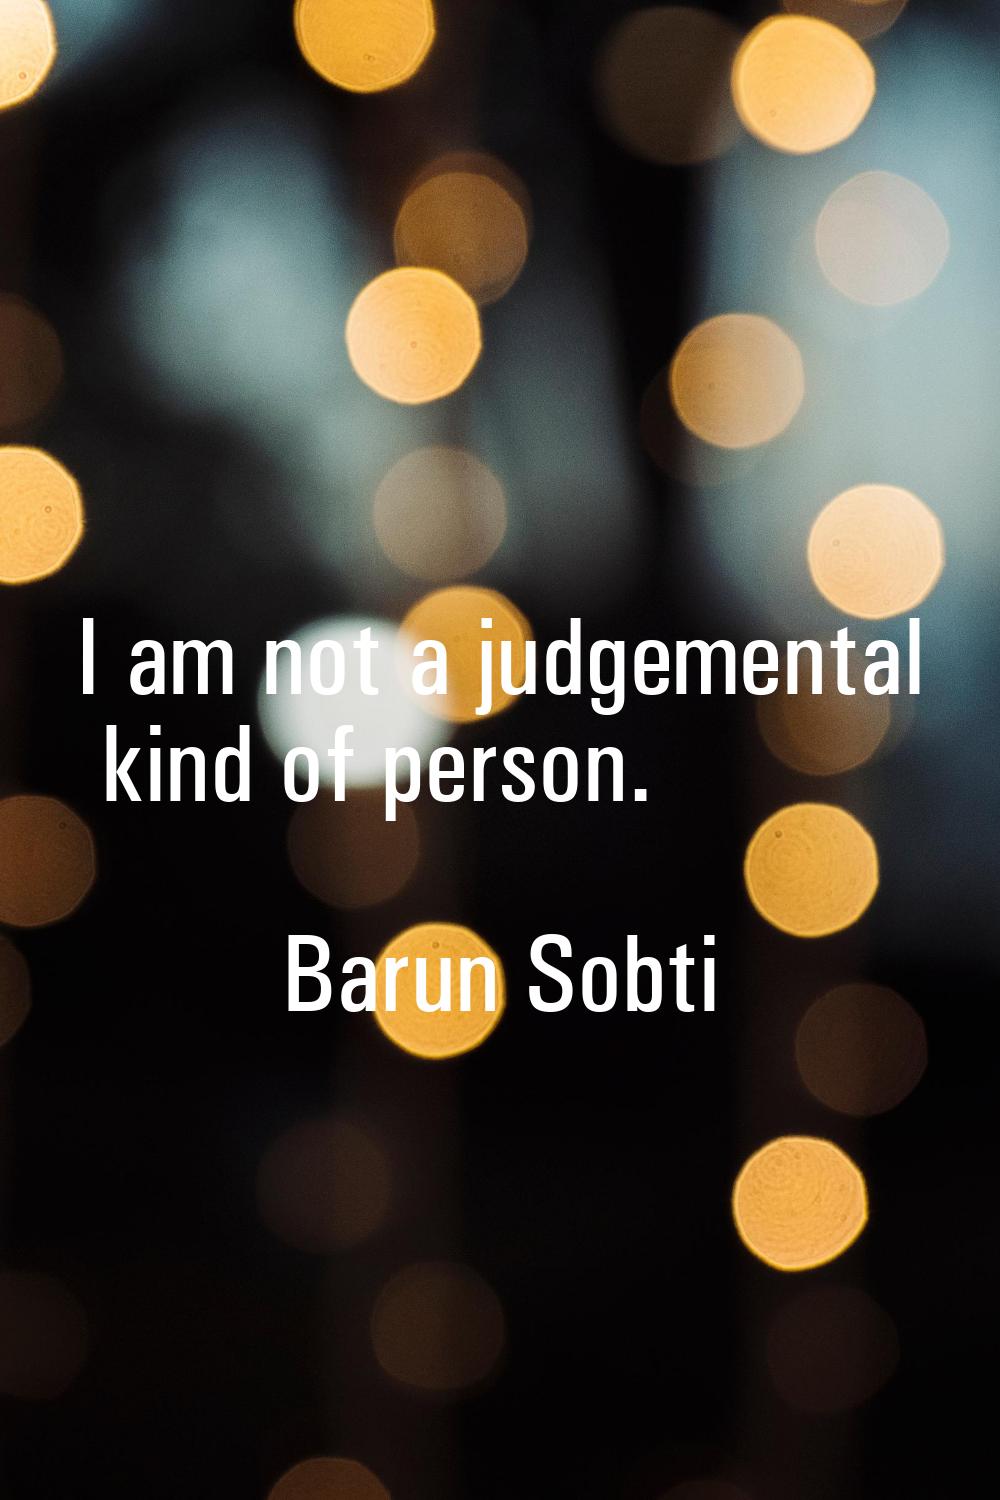 I am not a judgemental kind of person.